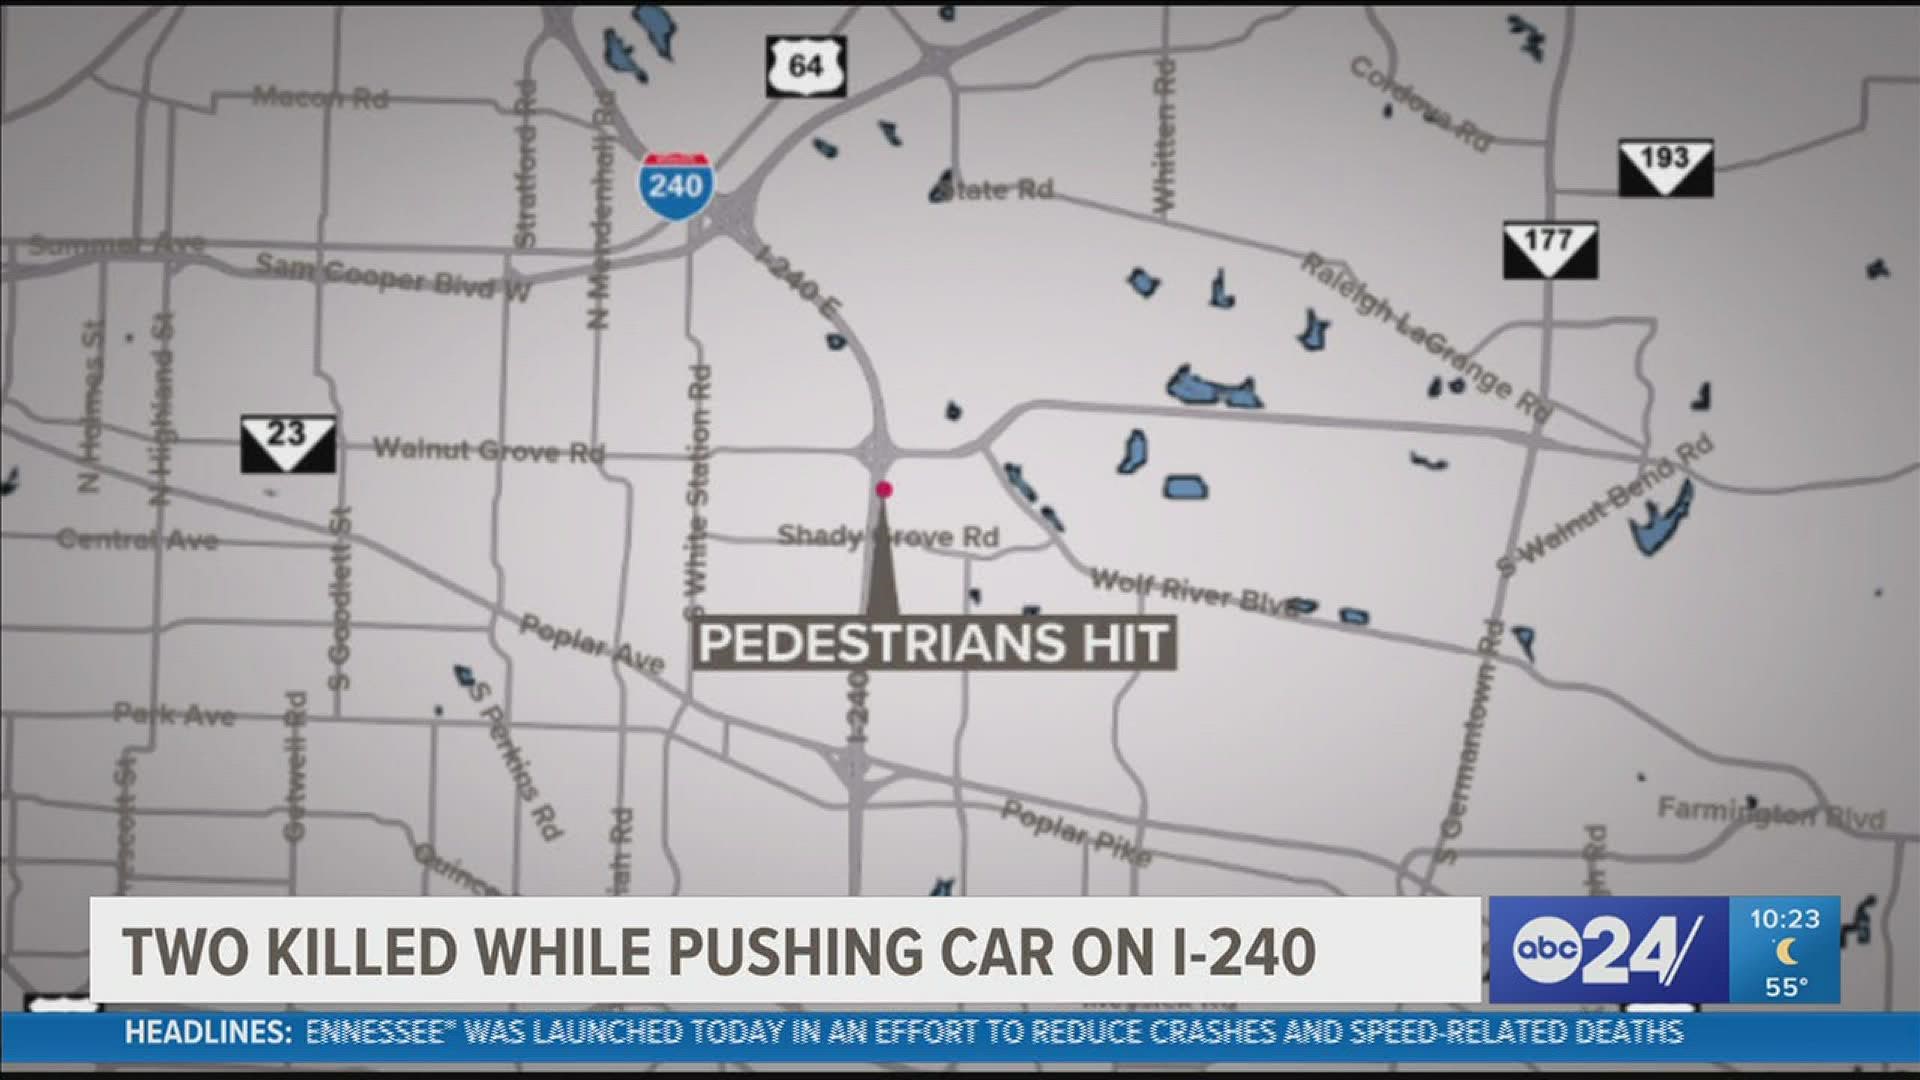 Two men were hit and killed early Saturday morning while they were trying to push a stalled car on the side of Interstate 240.